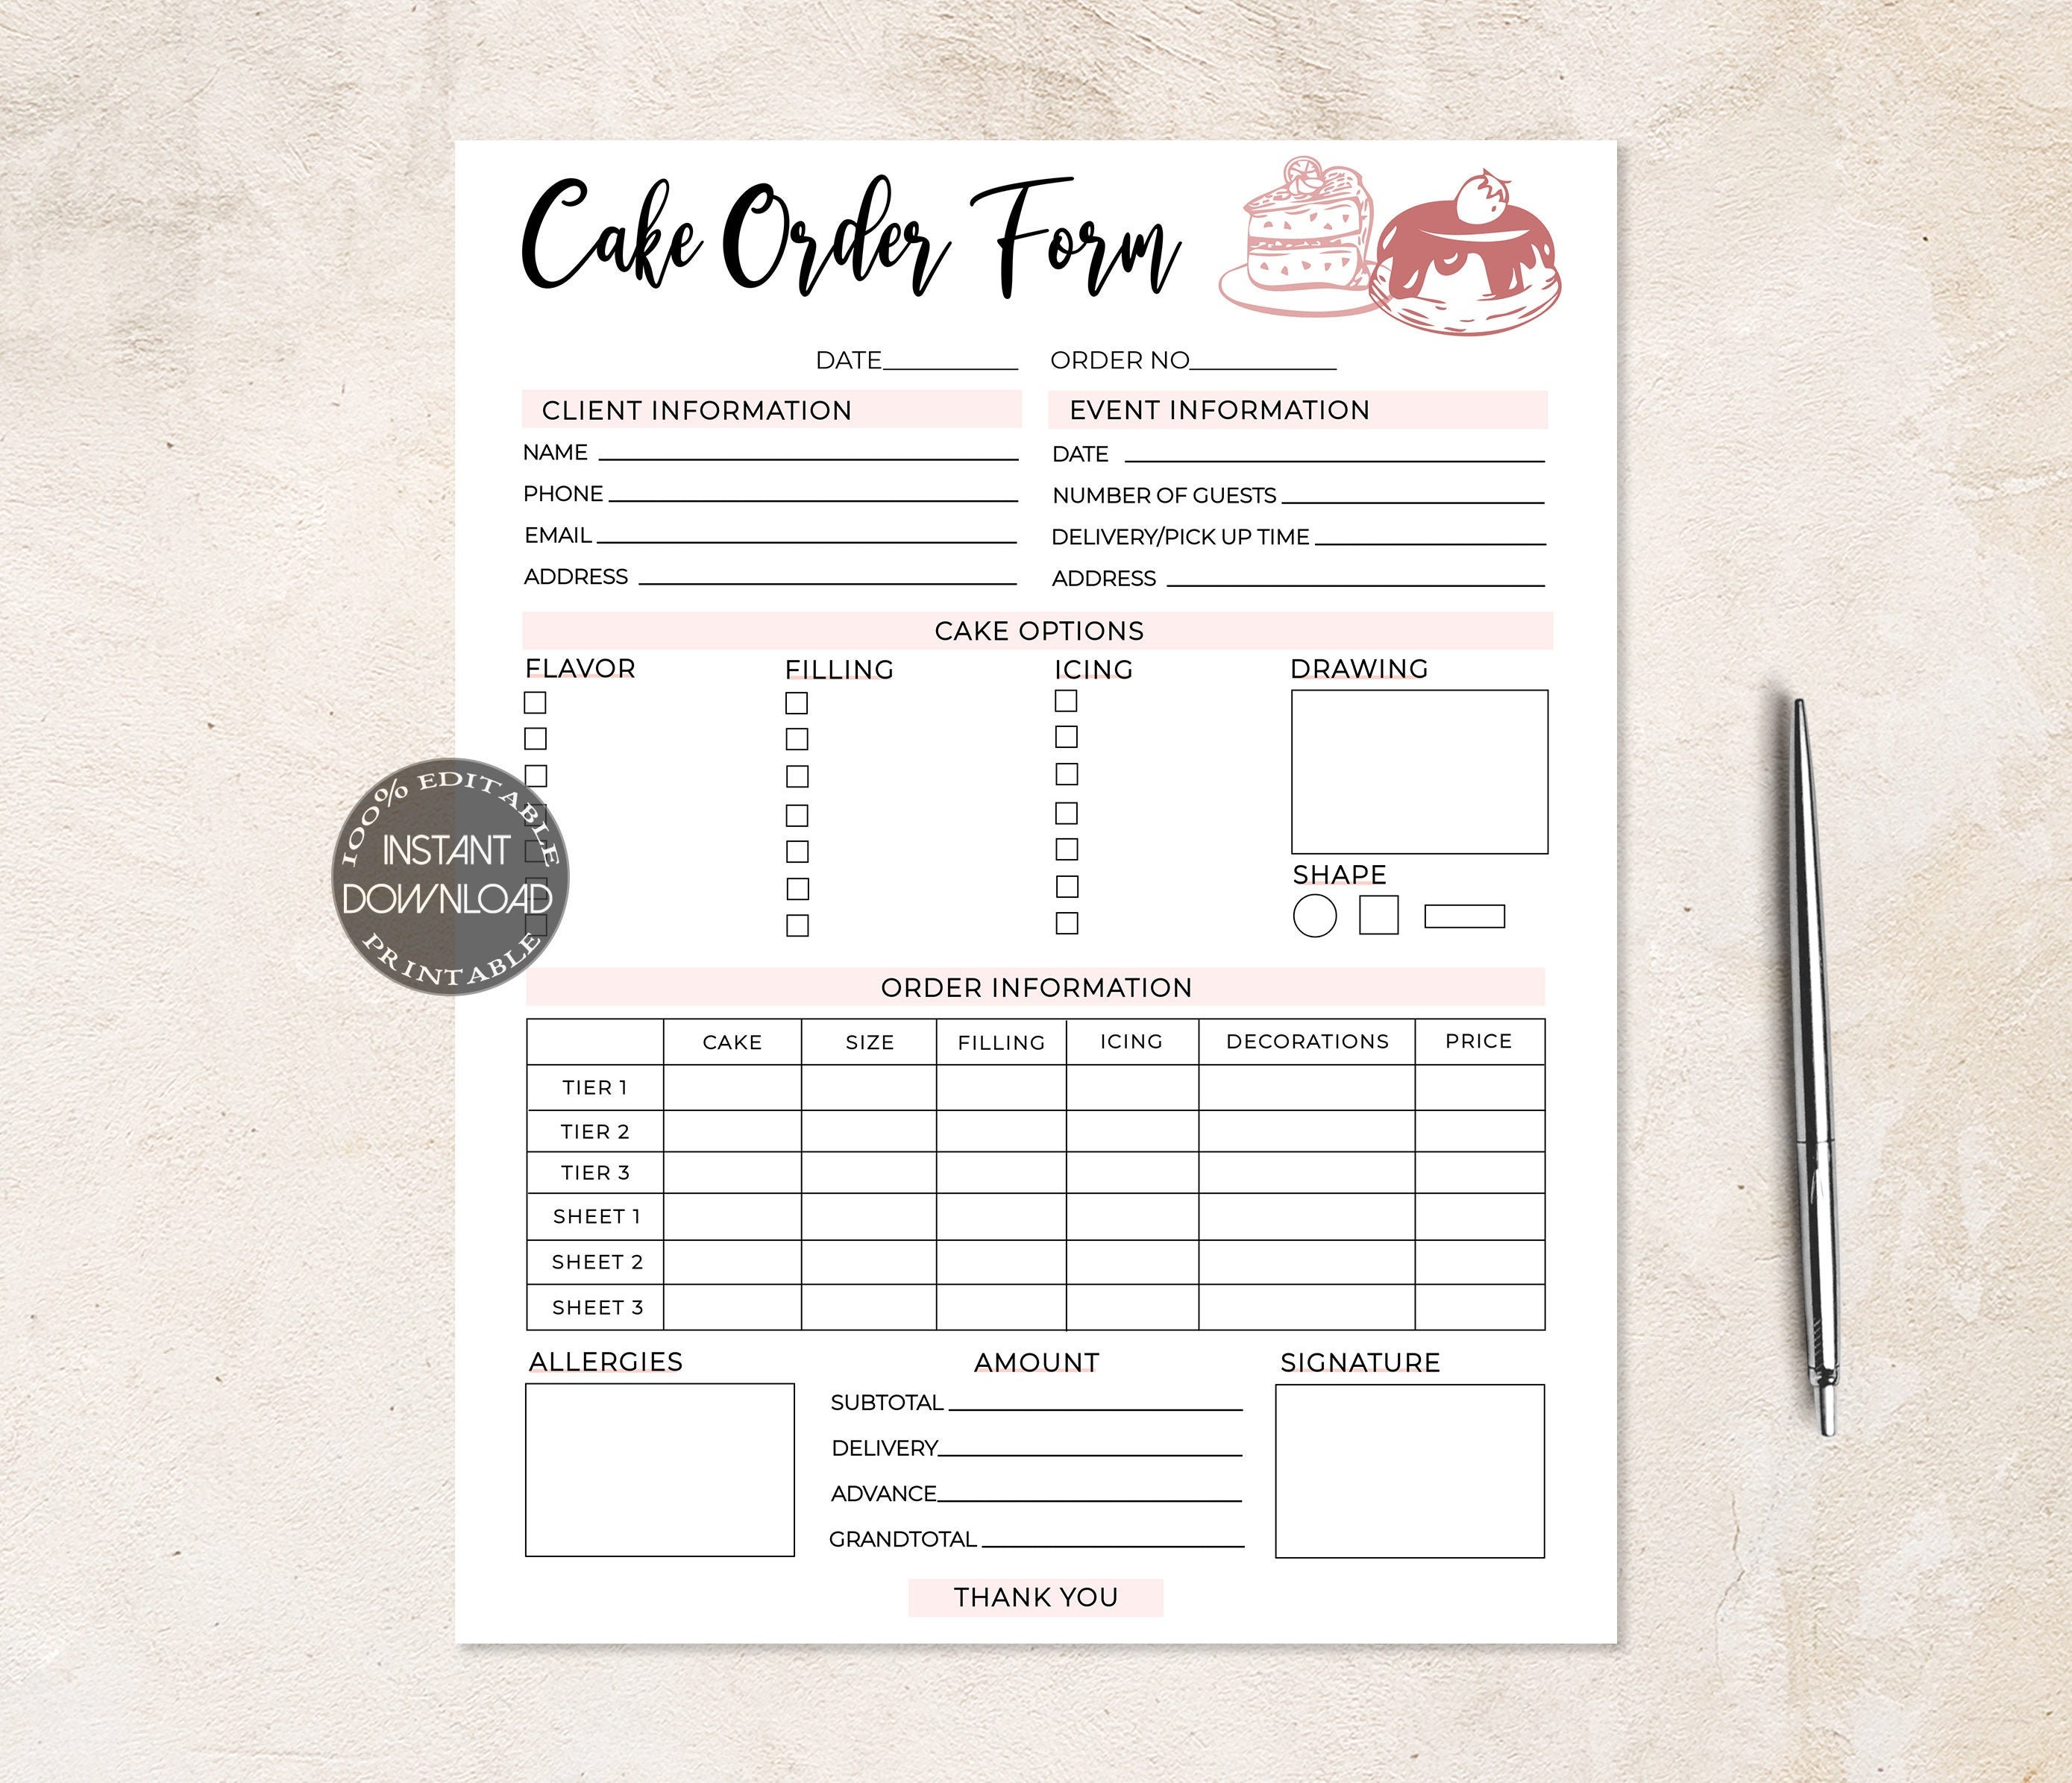 cake-order-form-template-bakery-order-form-printable-small